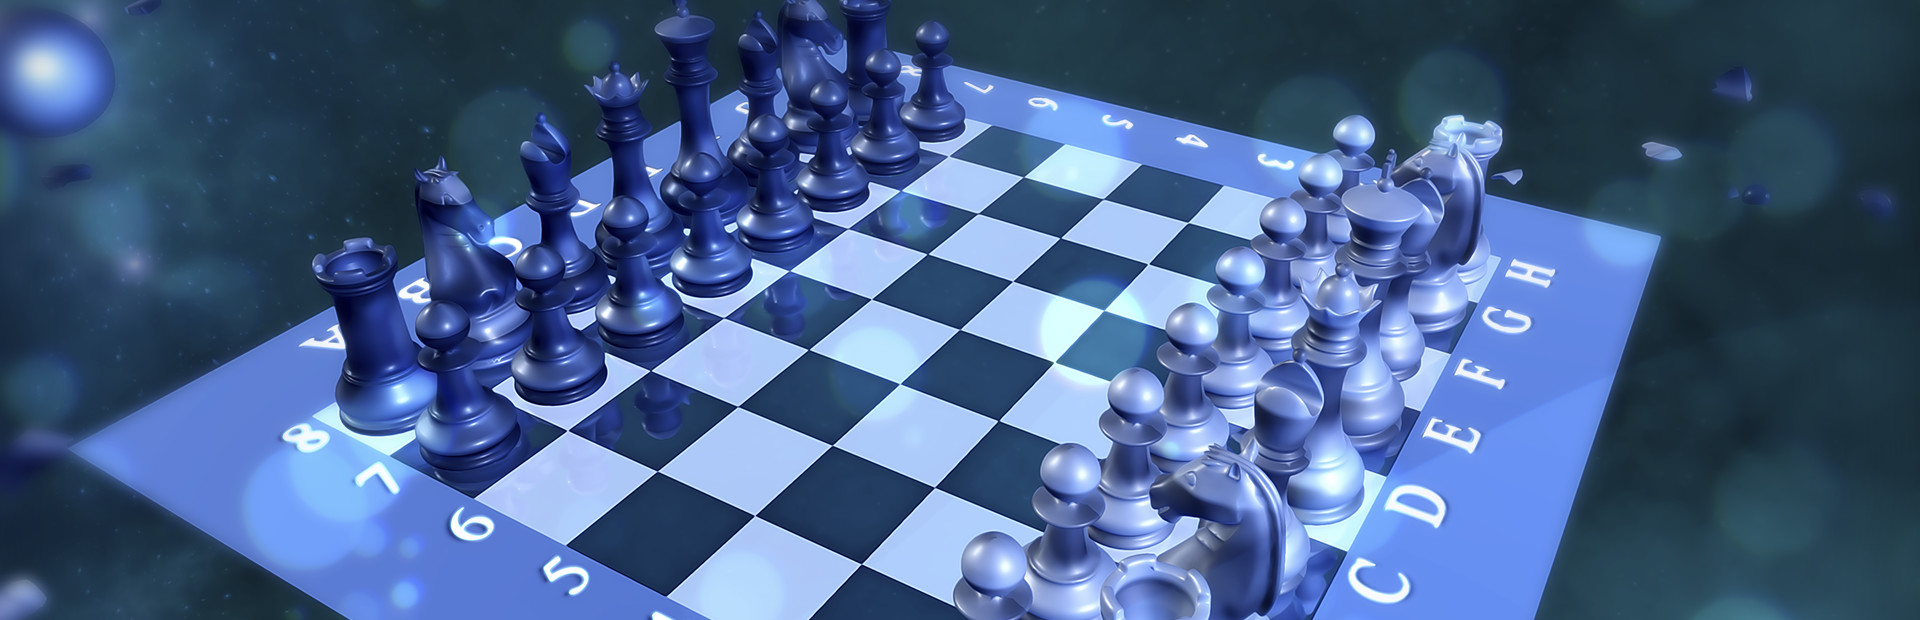 flChess cover image